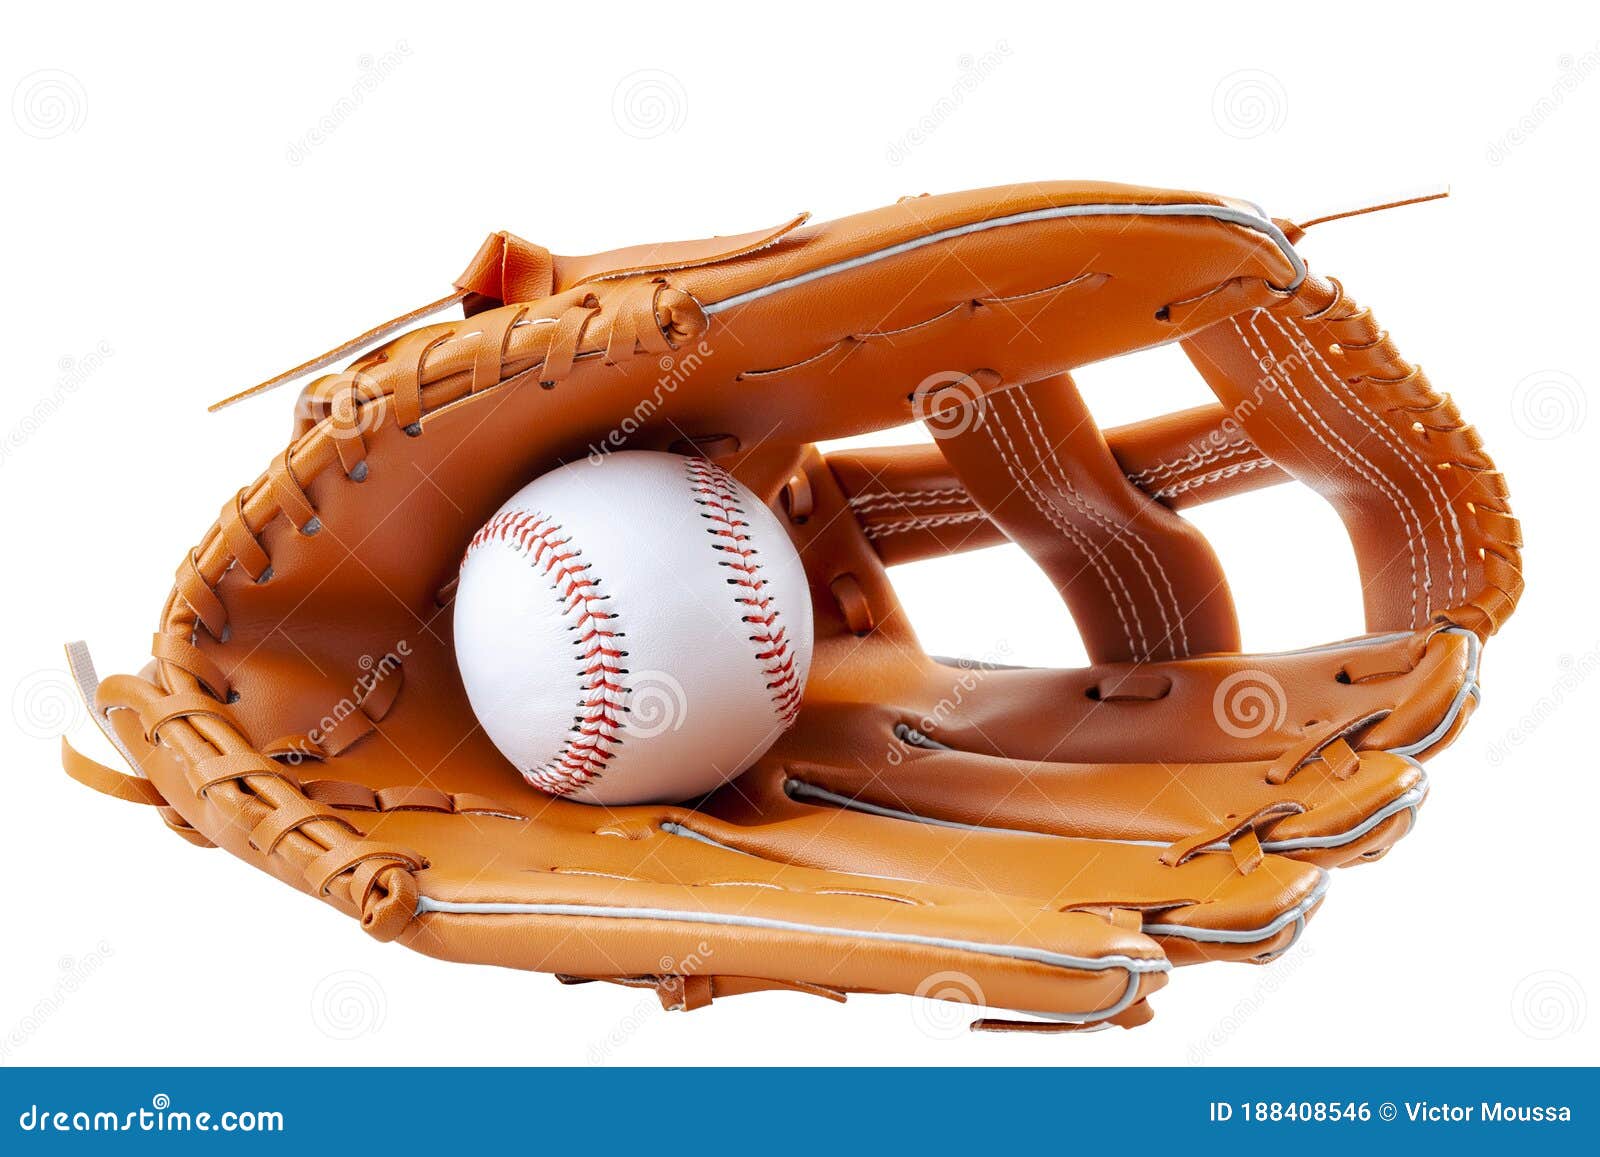 america s pastime, sporting equipment and american sports concept with a new generic baseball glove and holding a ball  on